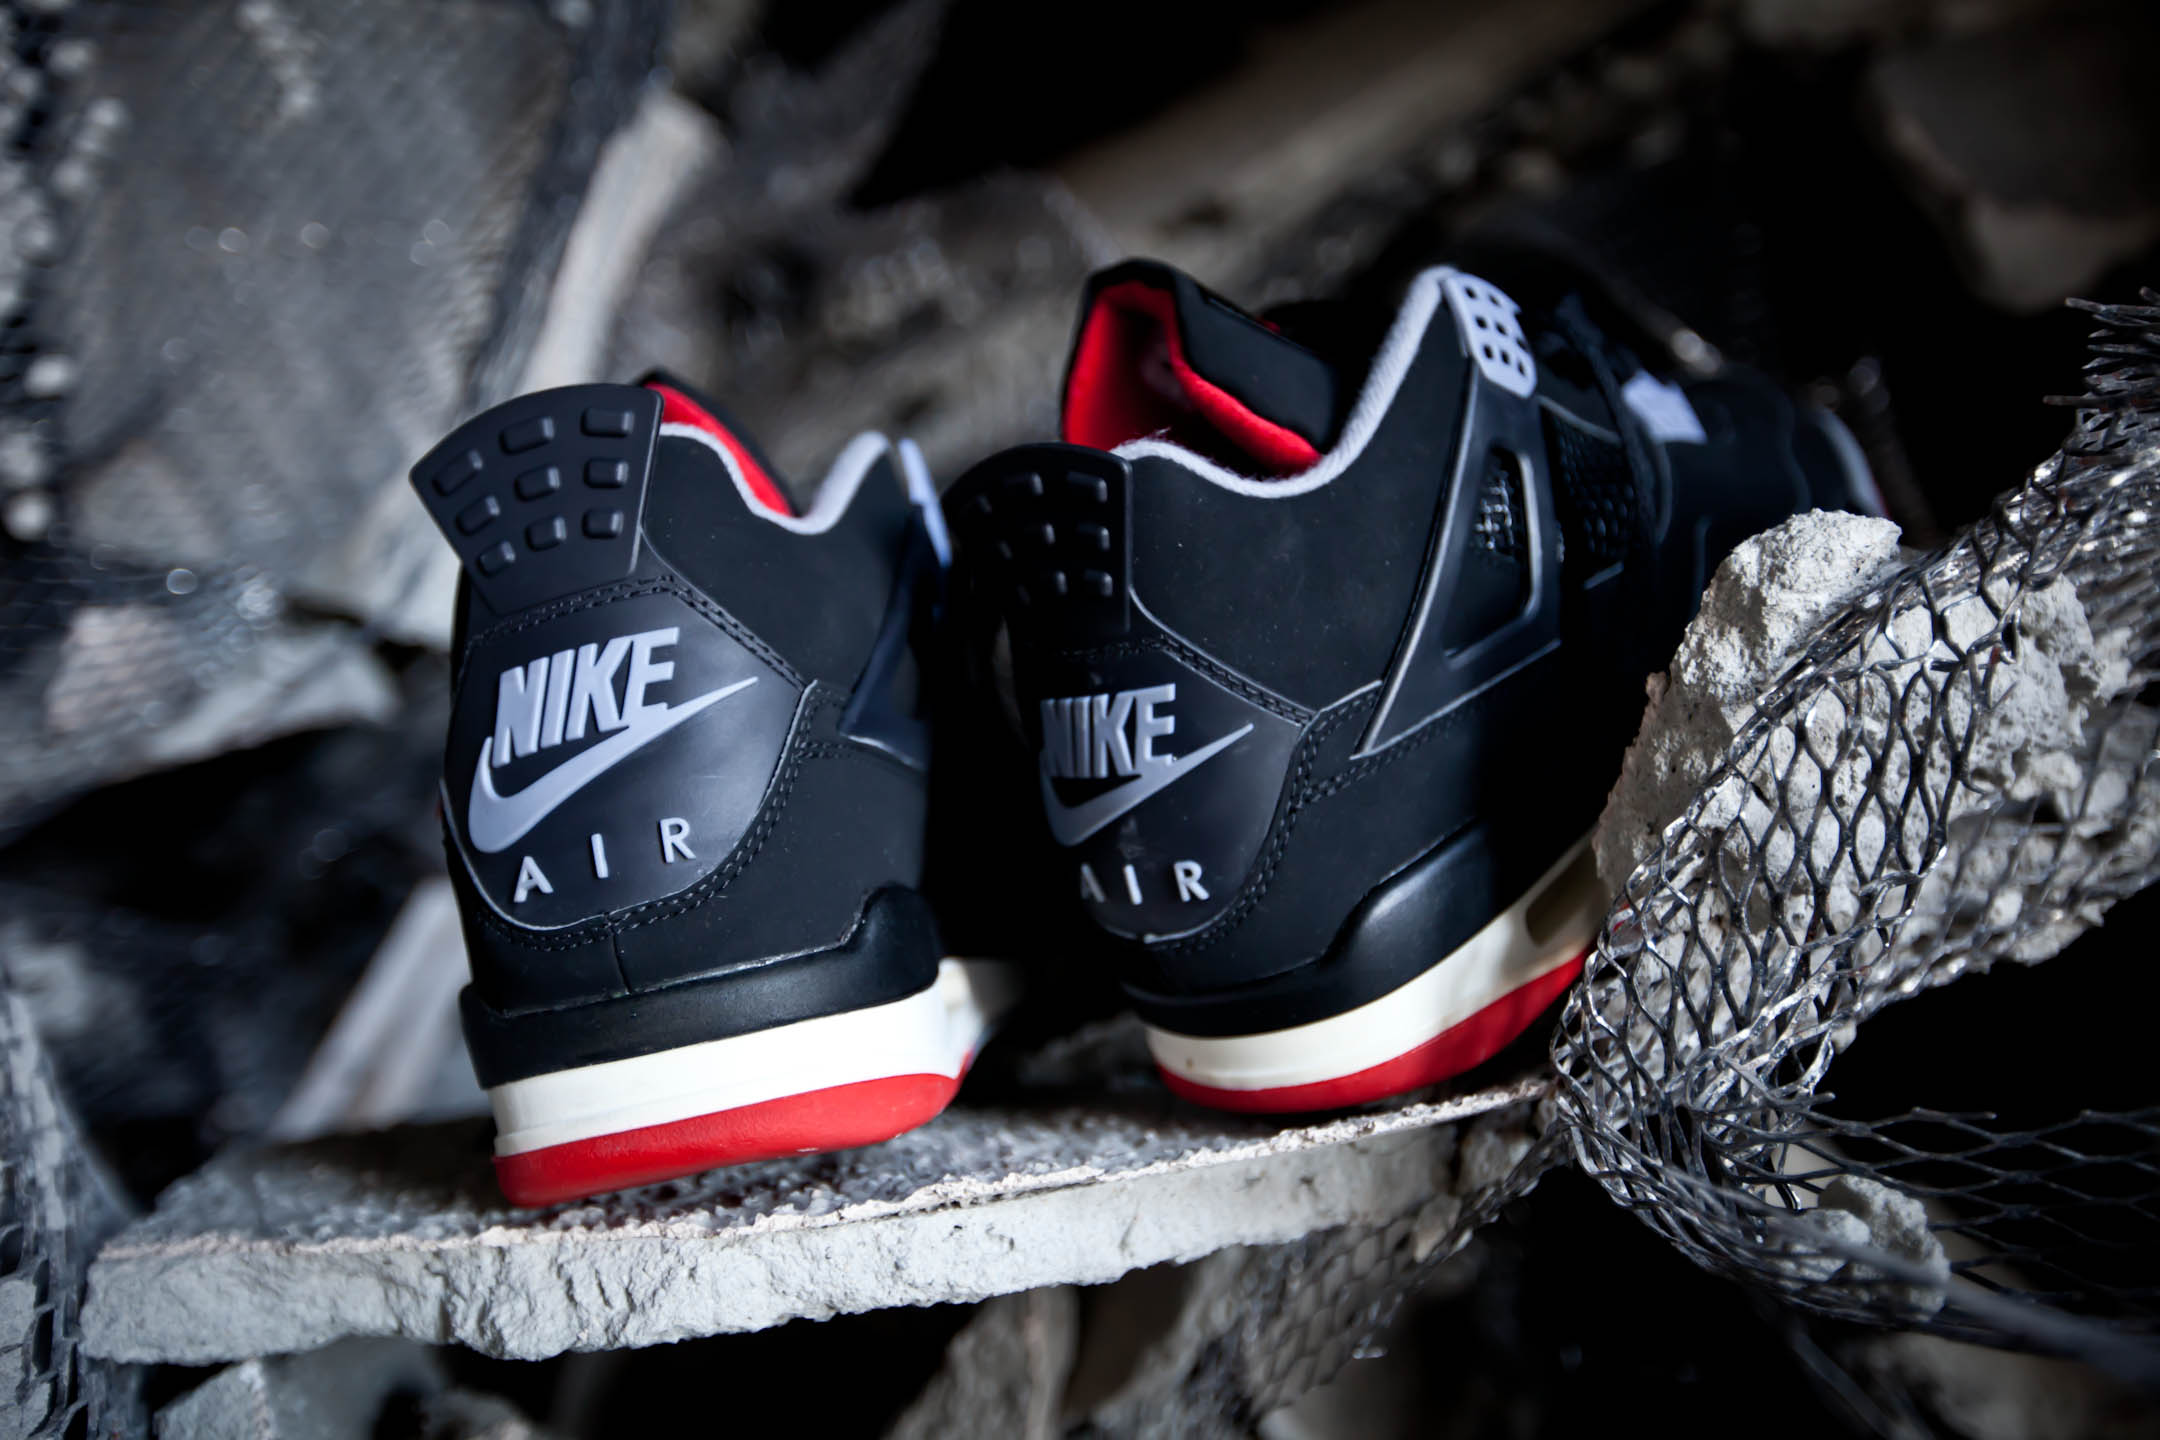 bred 4s